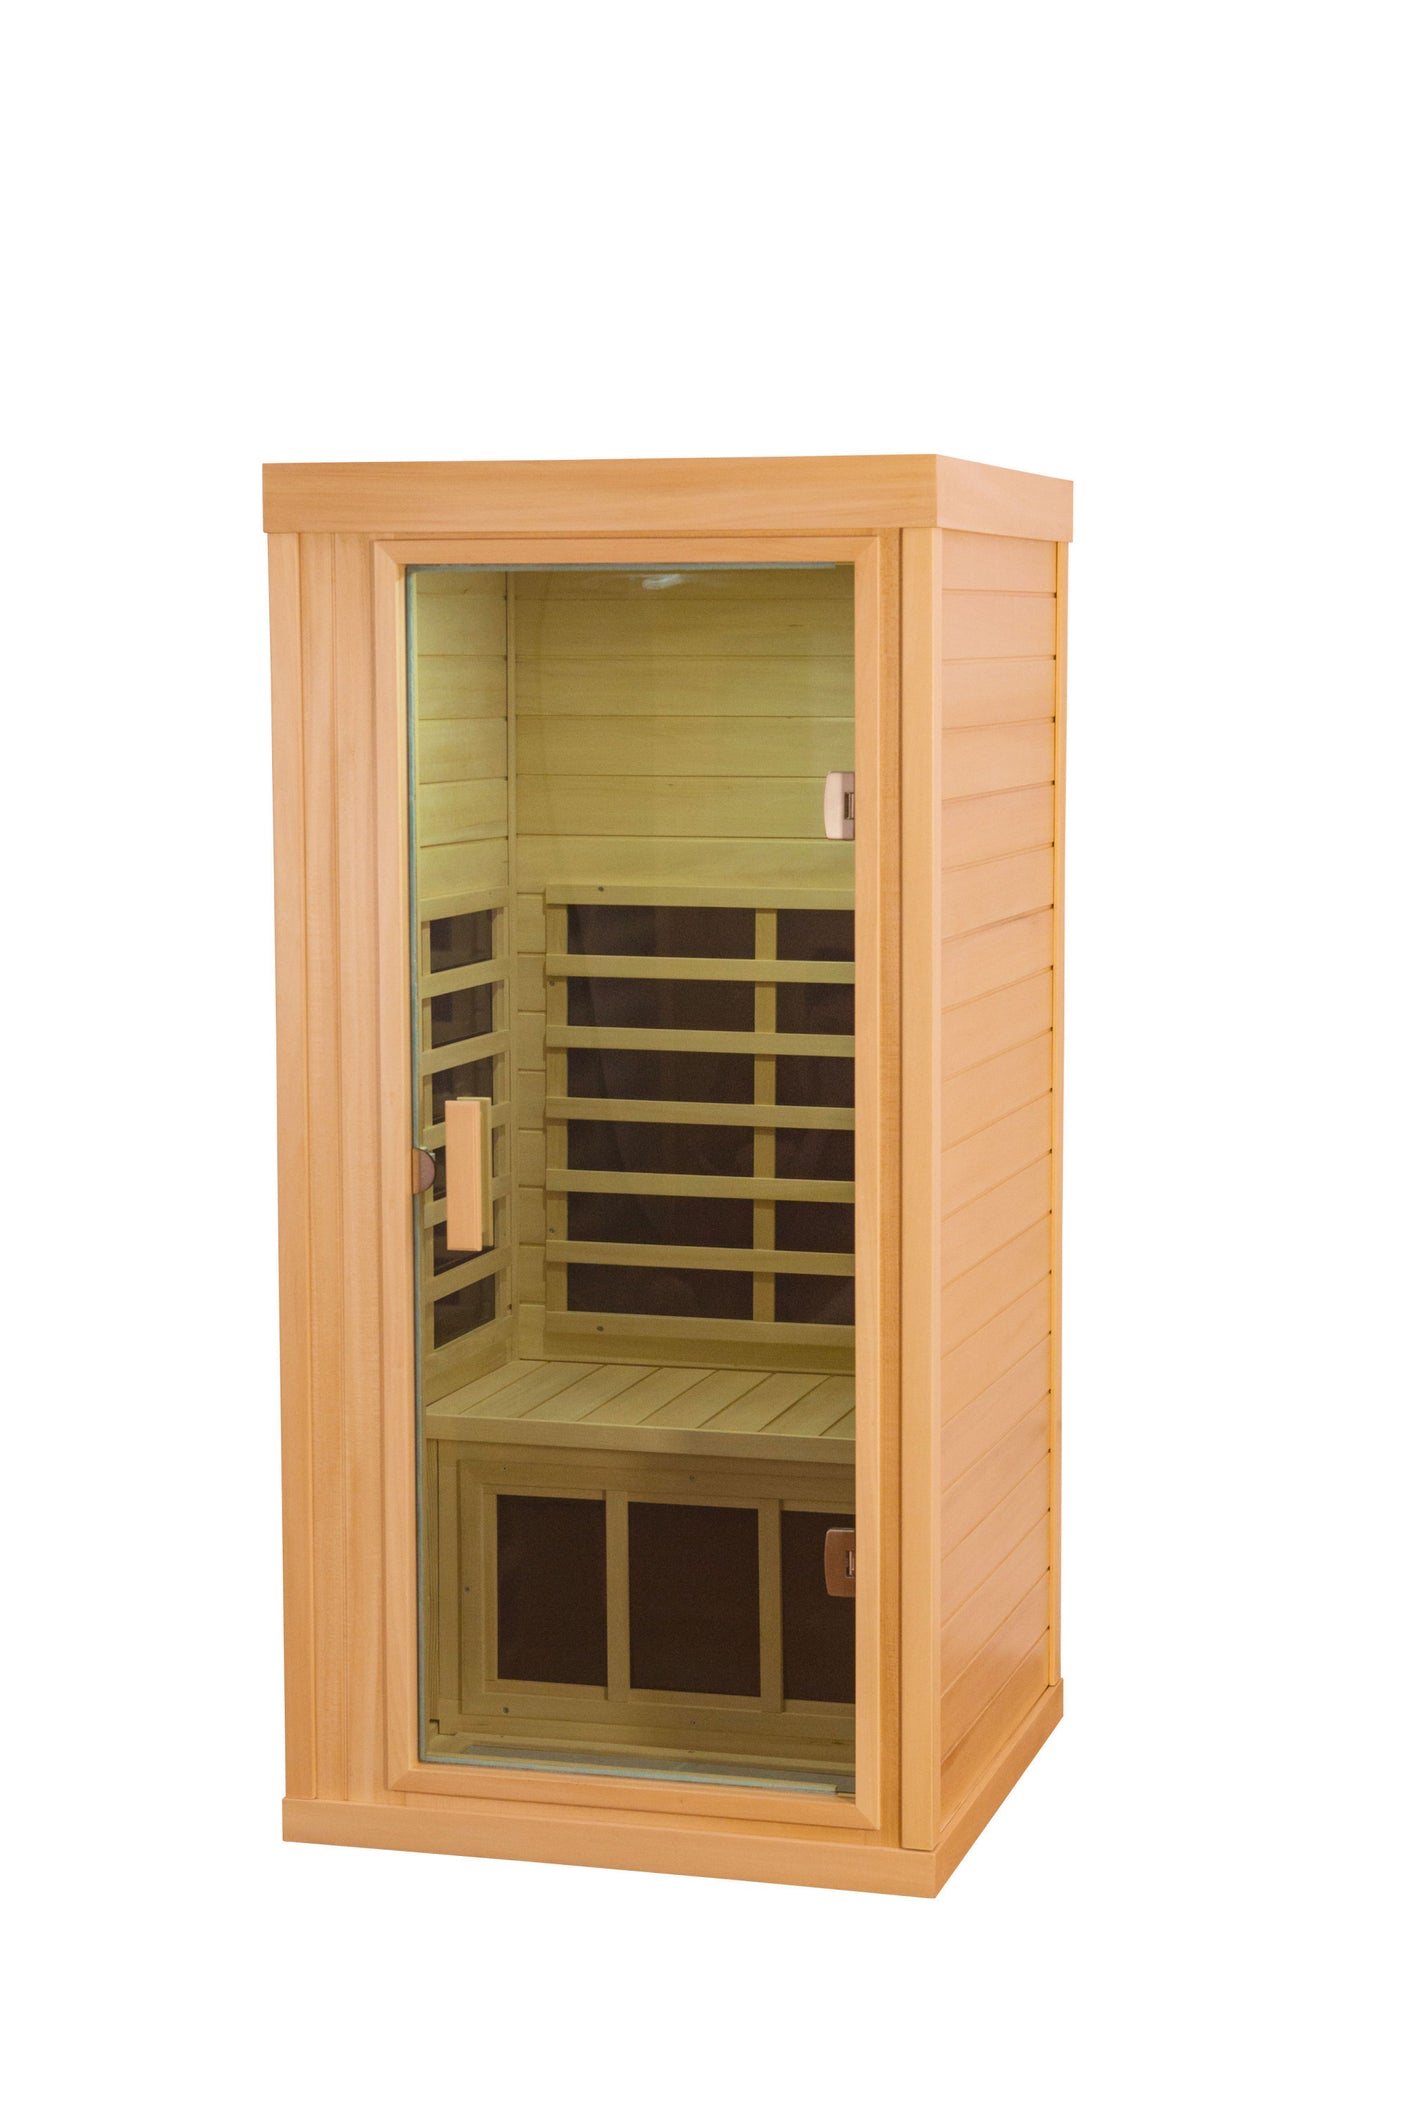 Sauna for one person